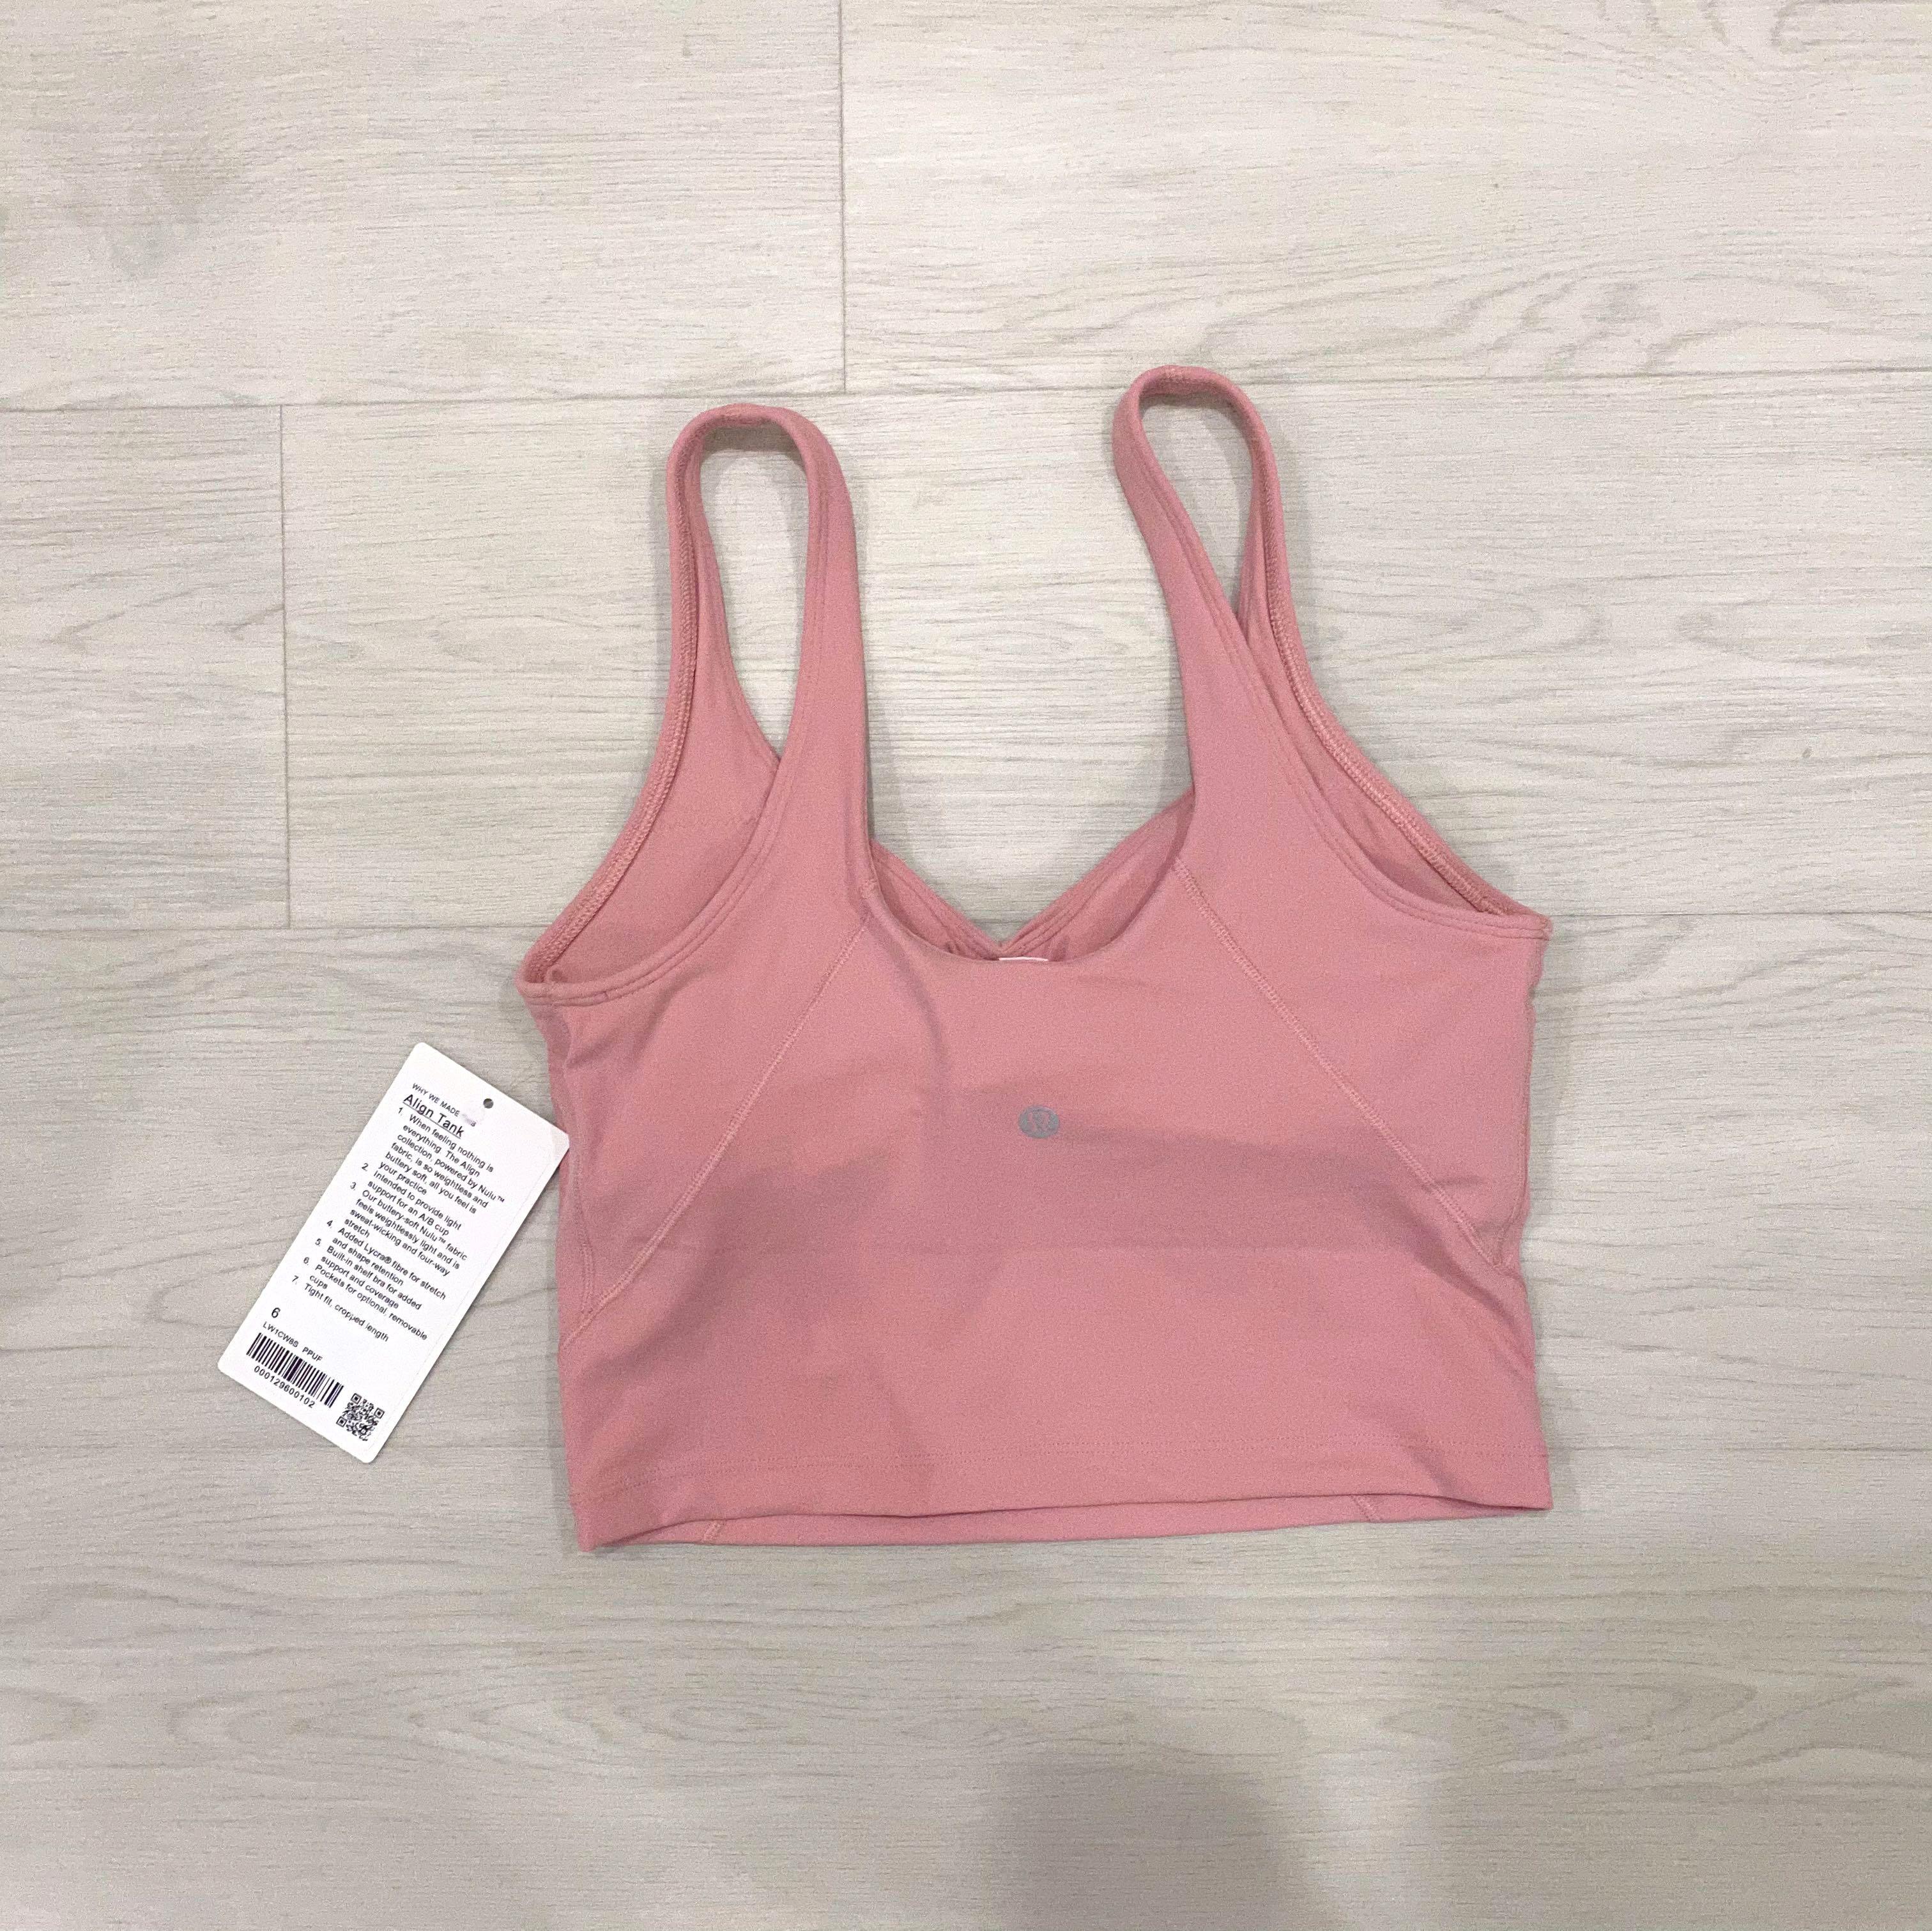 Lululemon Align Tank Top Pink Puff A/B Cup Tight Fit Cropped Length